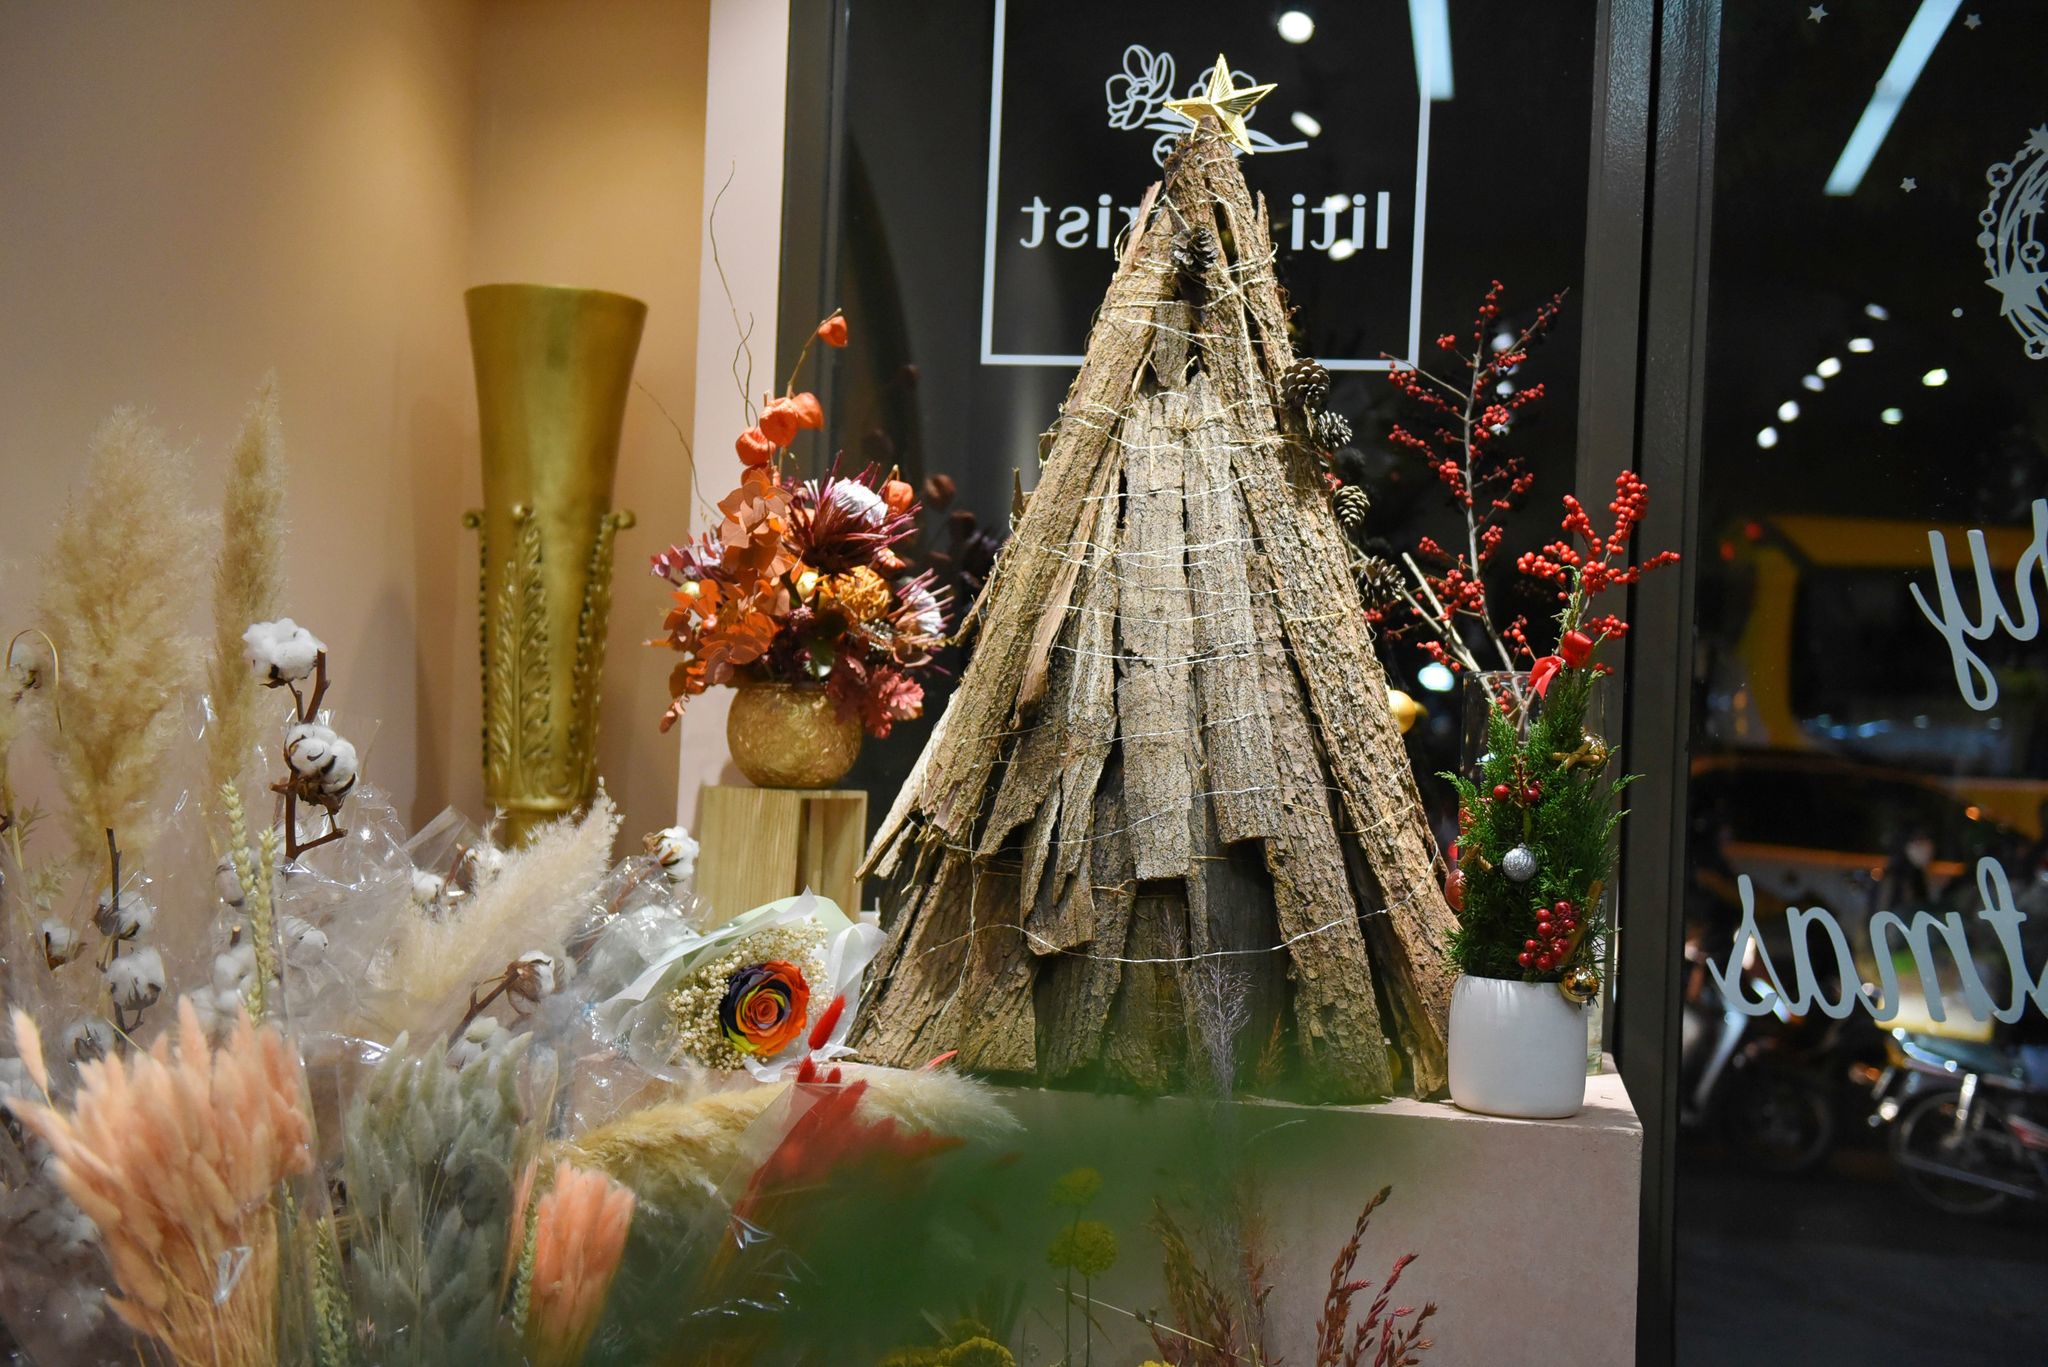 A Christmas tree made from tree bark is sold at VND5 million ($216) at a shop in Ho Chi Minh City’s District 3. Photo: Ngoc Phuong/ Tuoi Tre News